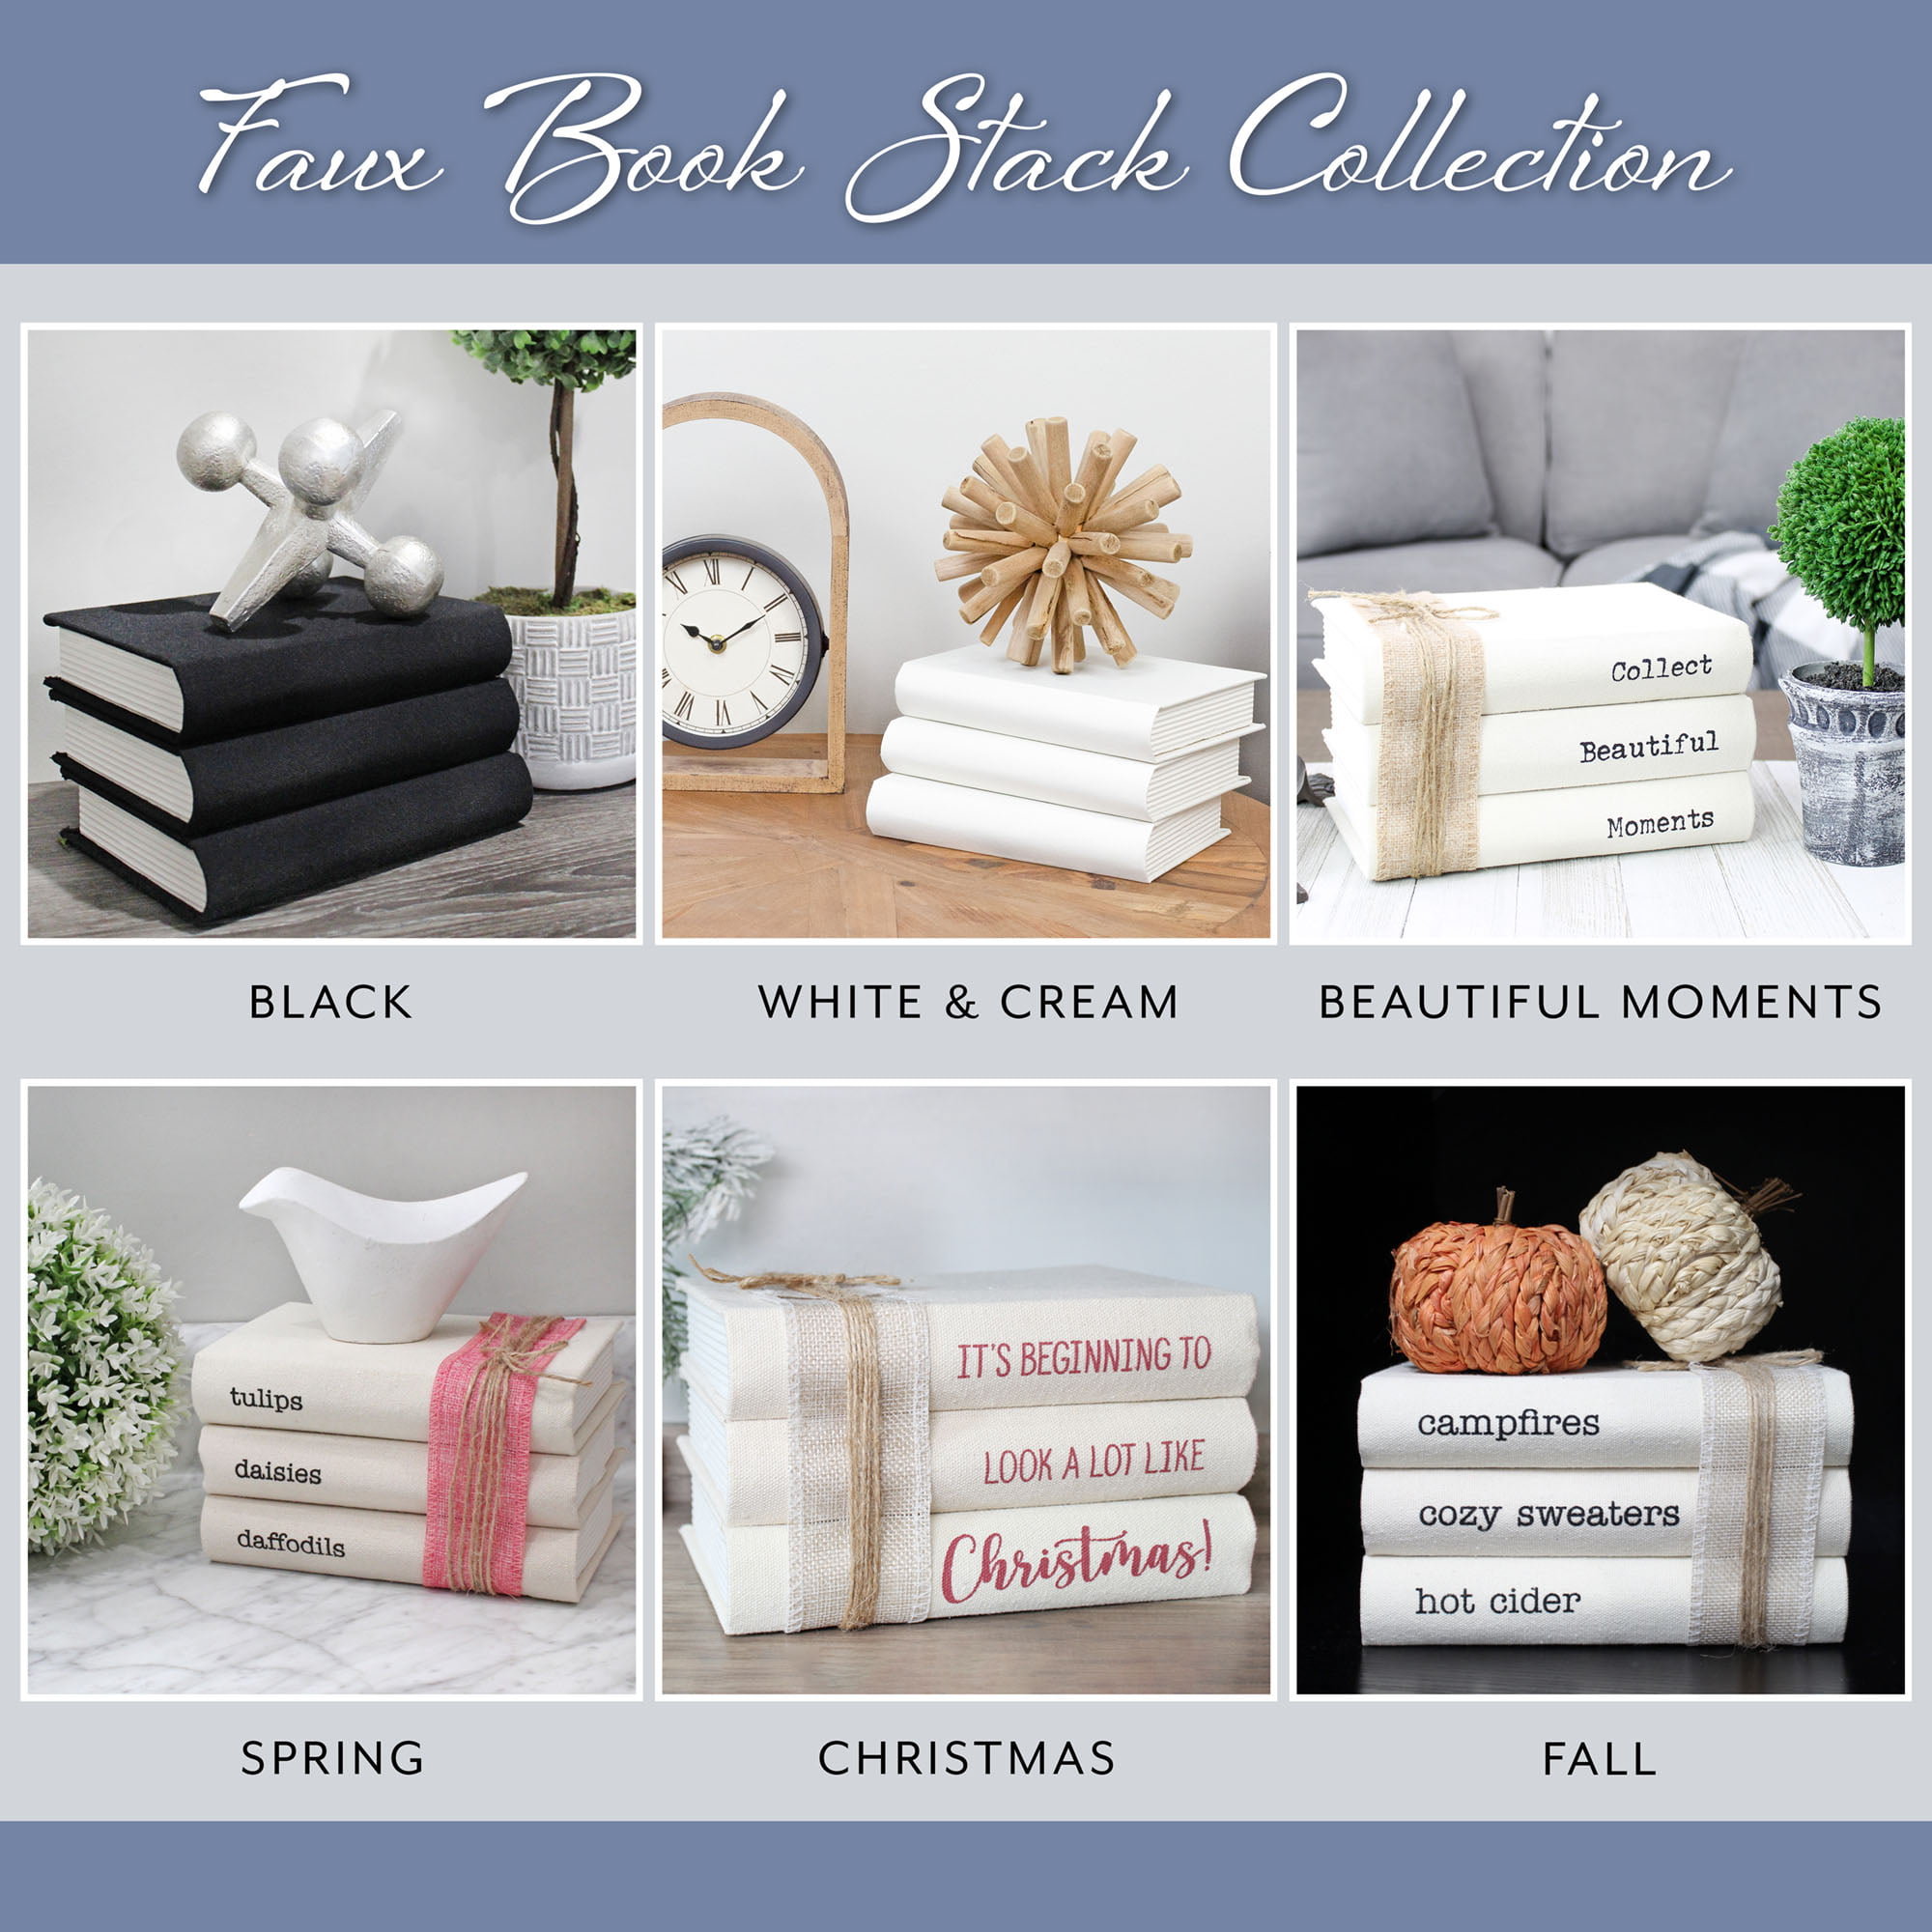 Faux books and faux storage books back in stock Faux books - 3,500 Storage  books- 4,000